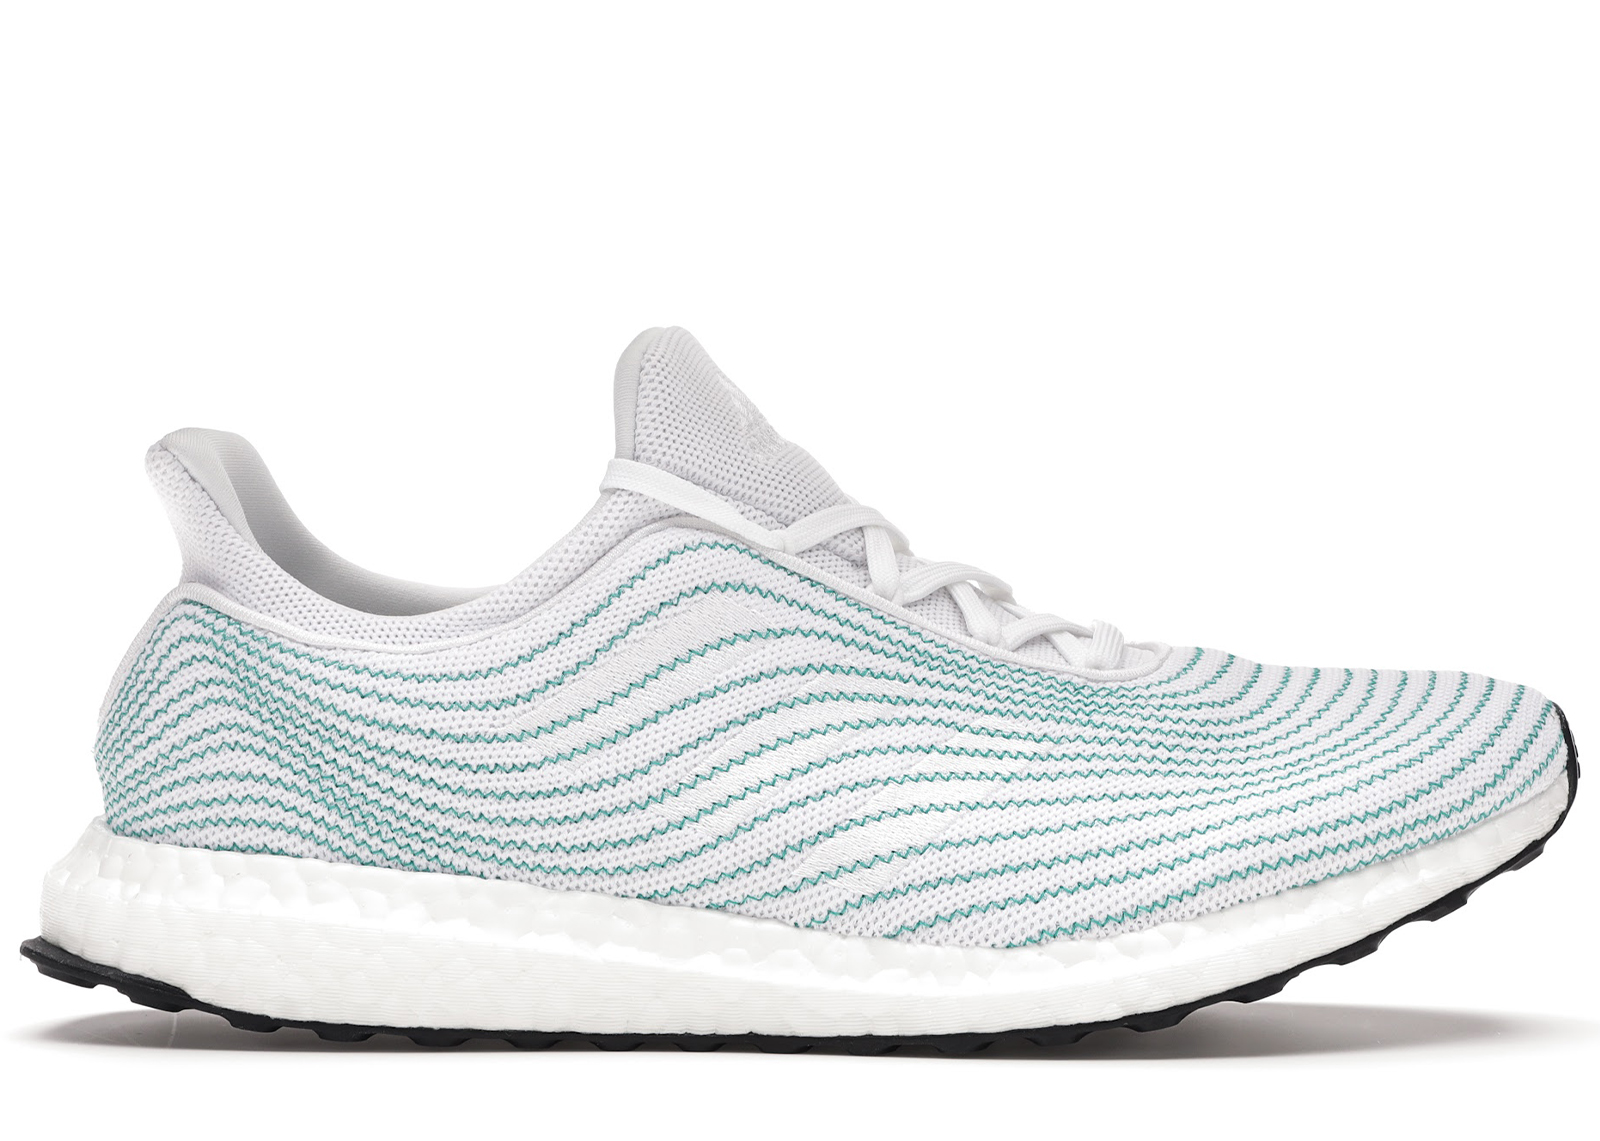 ultra boost mid parley white